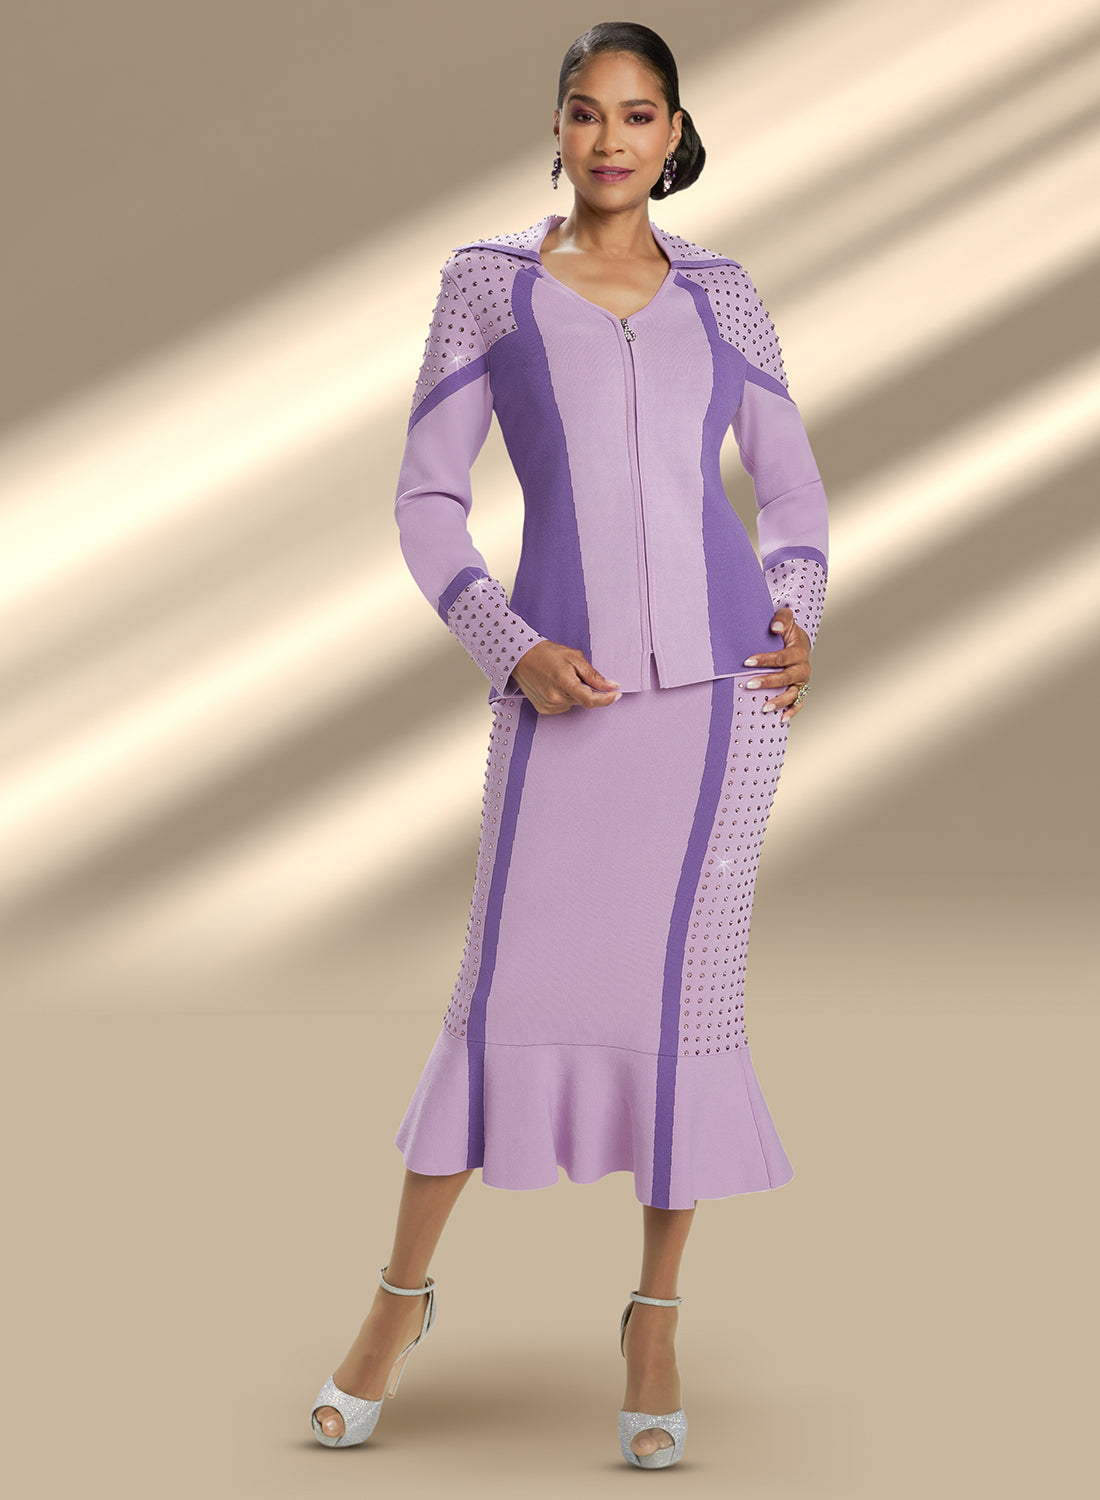 Donna Vinci 13362 - 2 PC Skirt Suit with Exclusive Knitted Yarn and Rhinestones